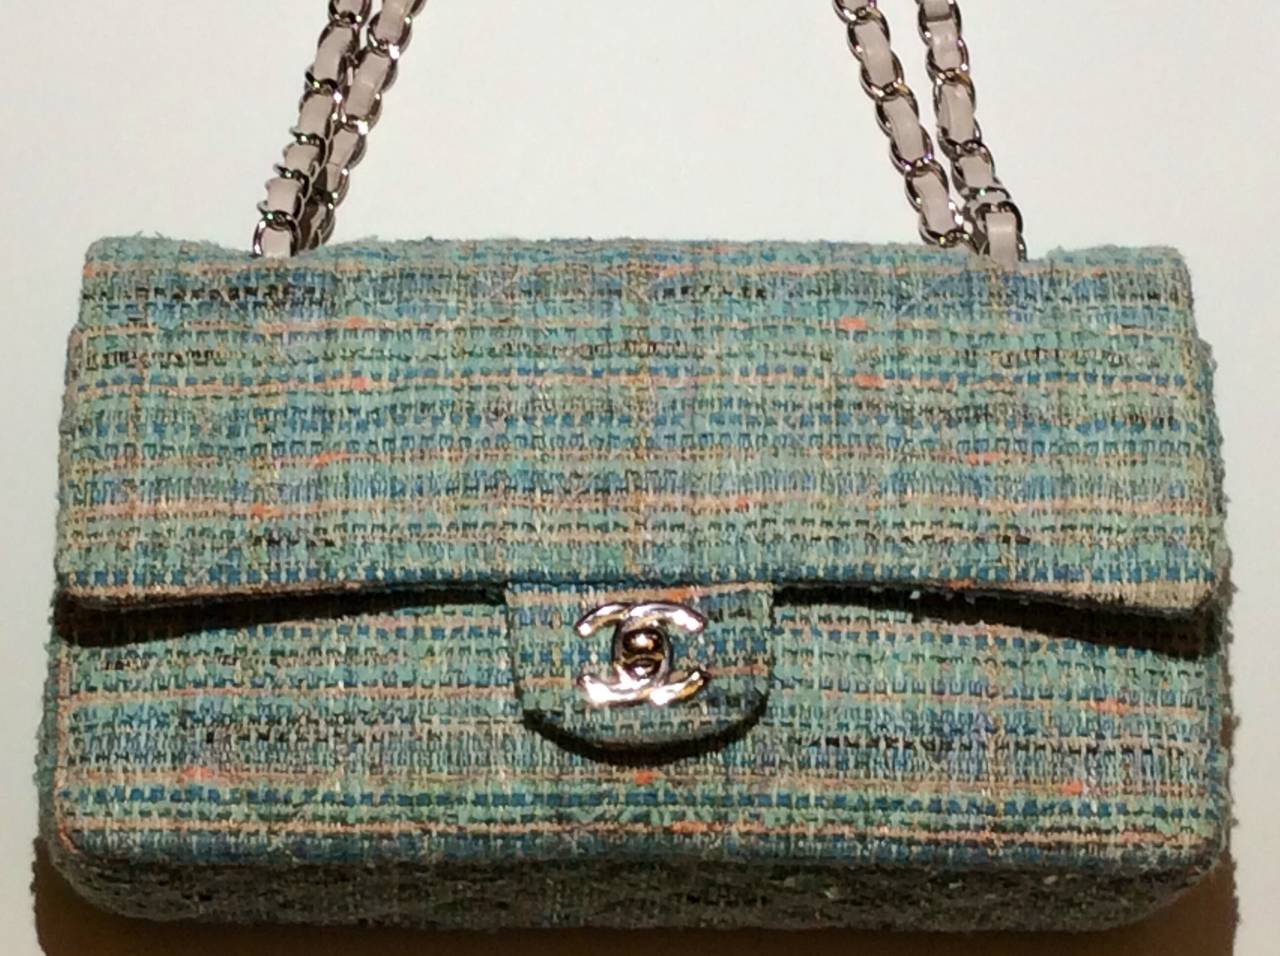 Chanel 2.55 quilted tweed double flat leather lined handbag with silver hardware and alabaster white leather shoulder straps.  The most beautiful color combination of blues, turquoise, peach, white. Will work with simply most solid colors.  Serial